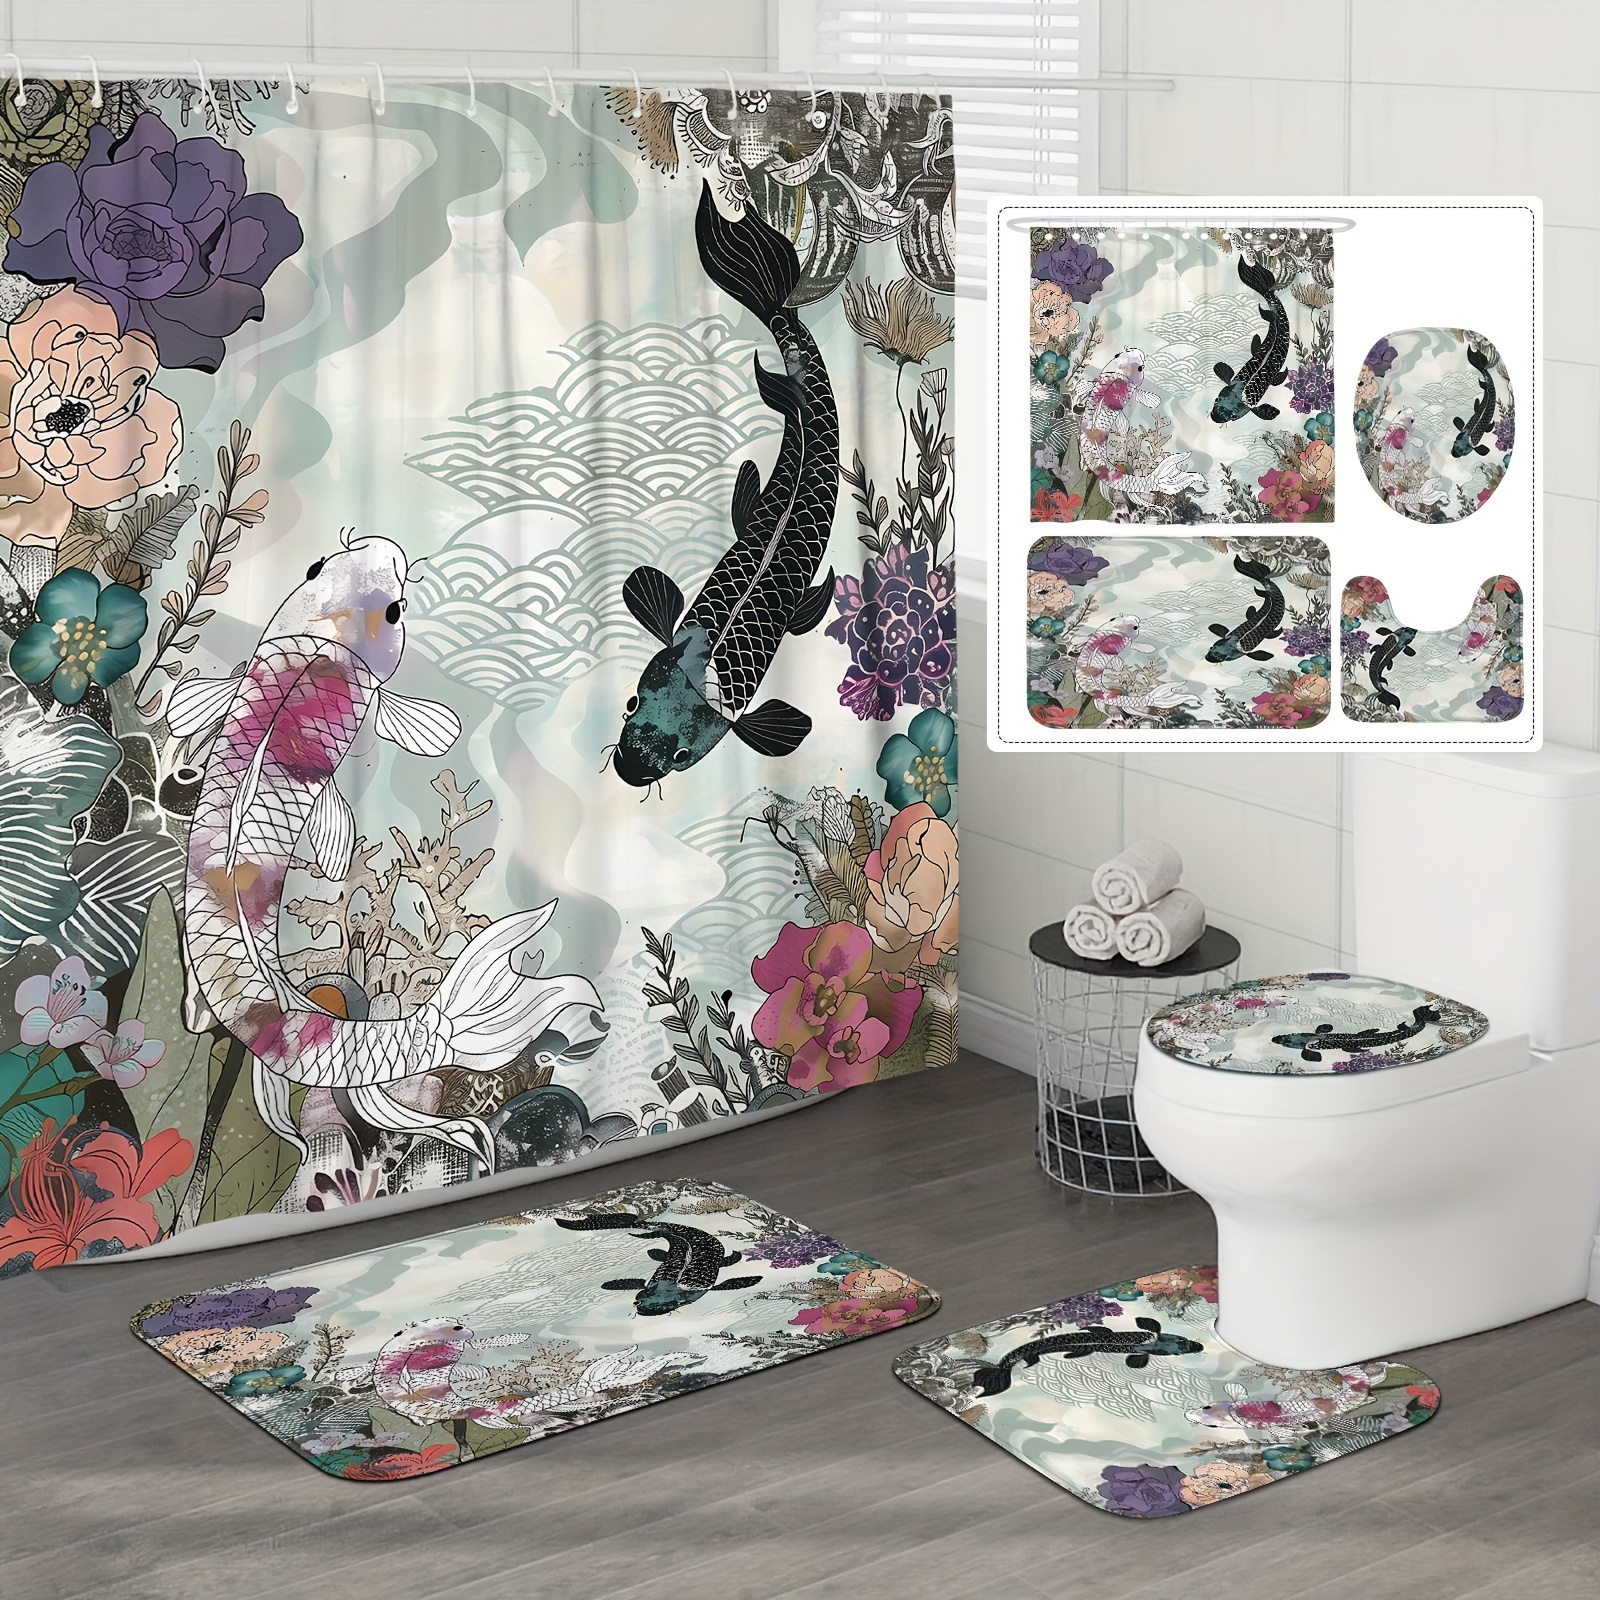 

Koi Fish Floral Botanical Shower Curtain Set With 12 Hooks, Waterproof Polyester Ocean Themed Bath & Toilet Mat, Non-slip, Water-resistant, Machine Washable, Asian Style Bathroom Decor